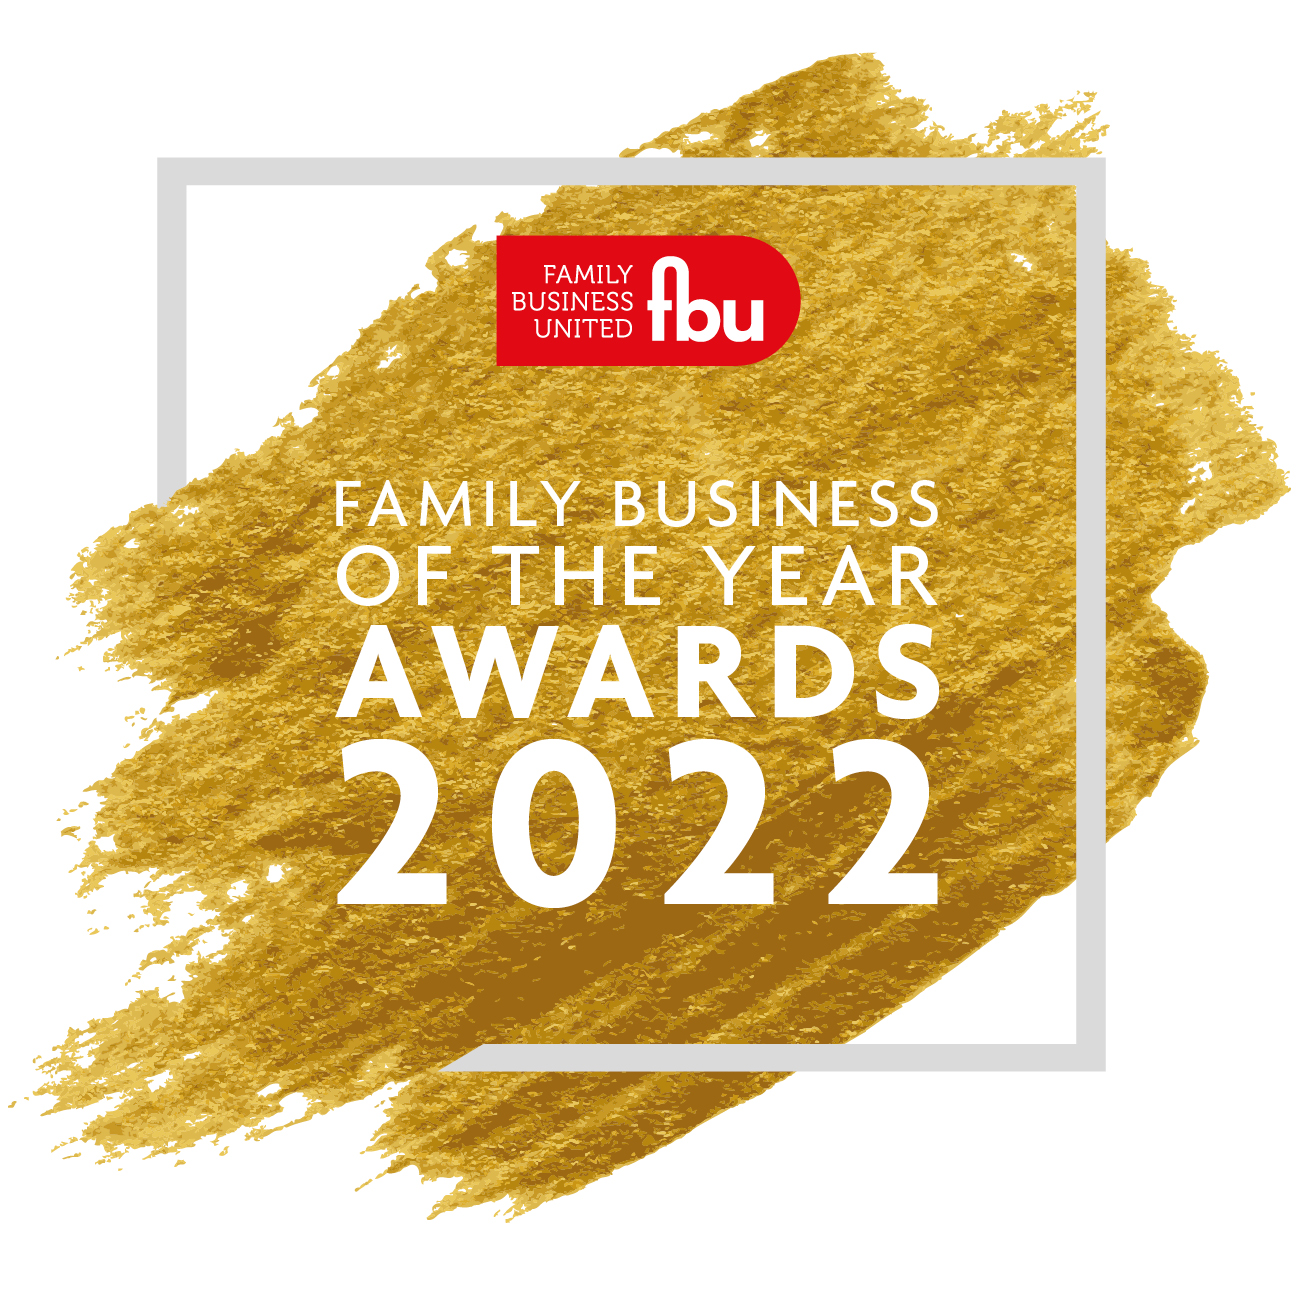 Web Alliance received Family Business of the Year 2022